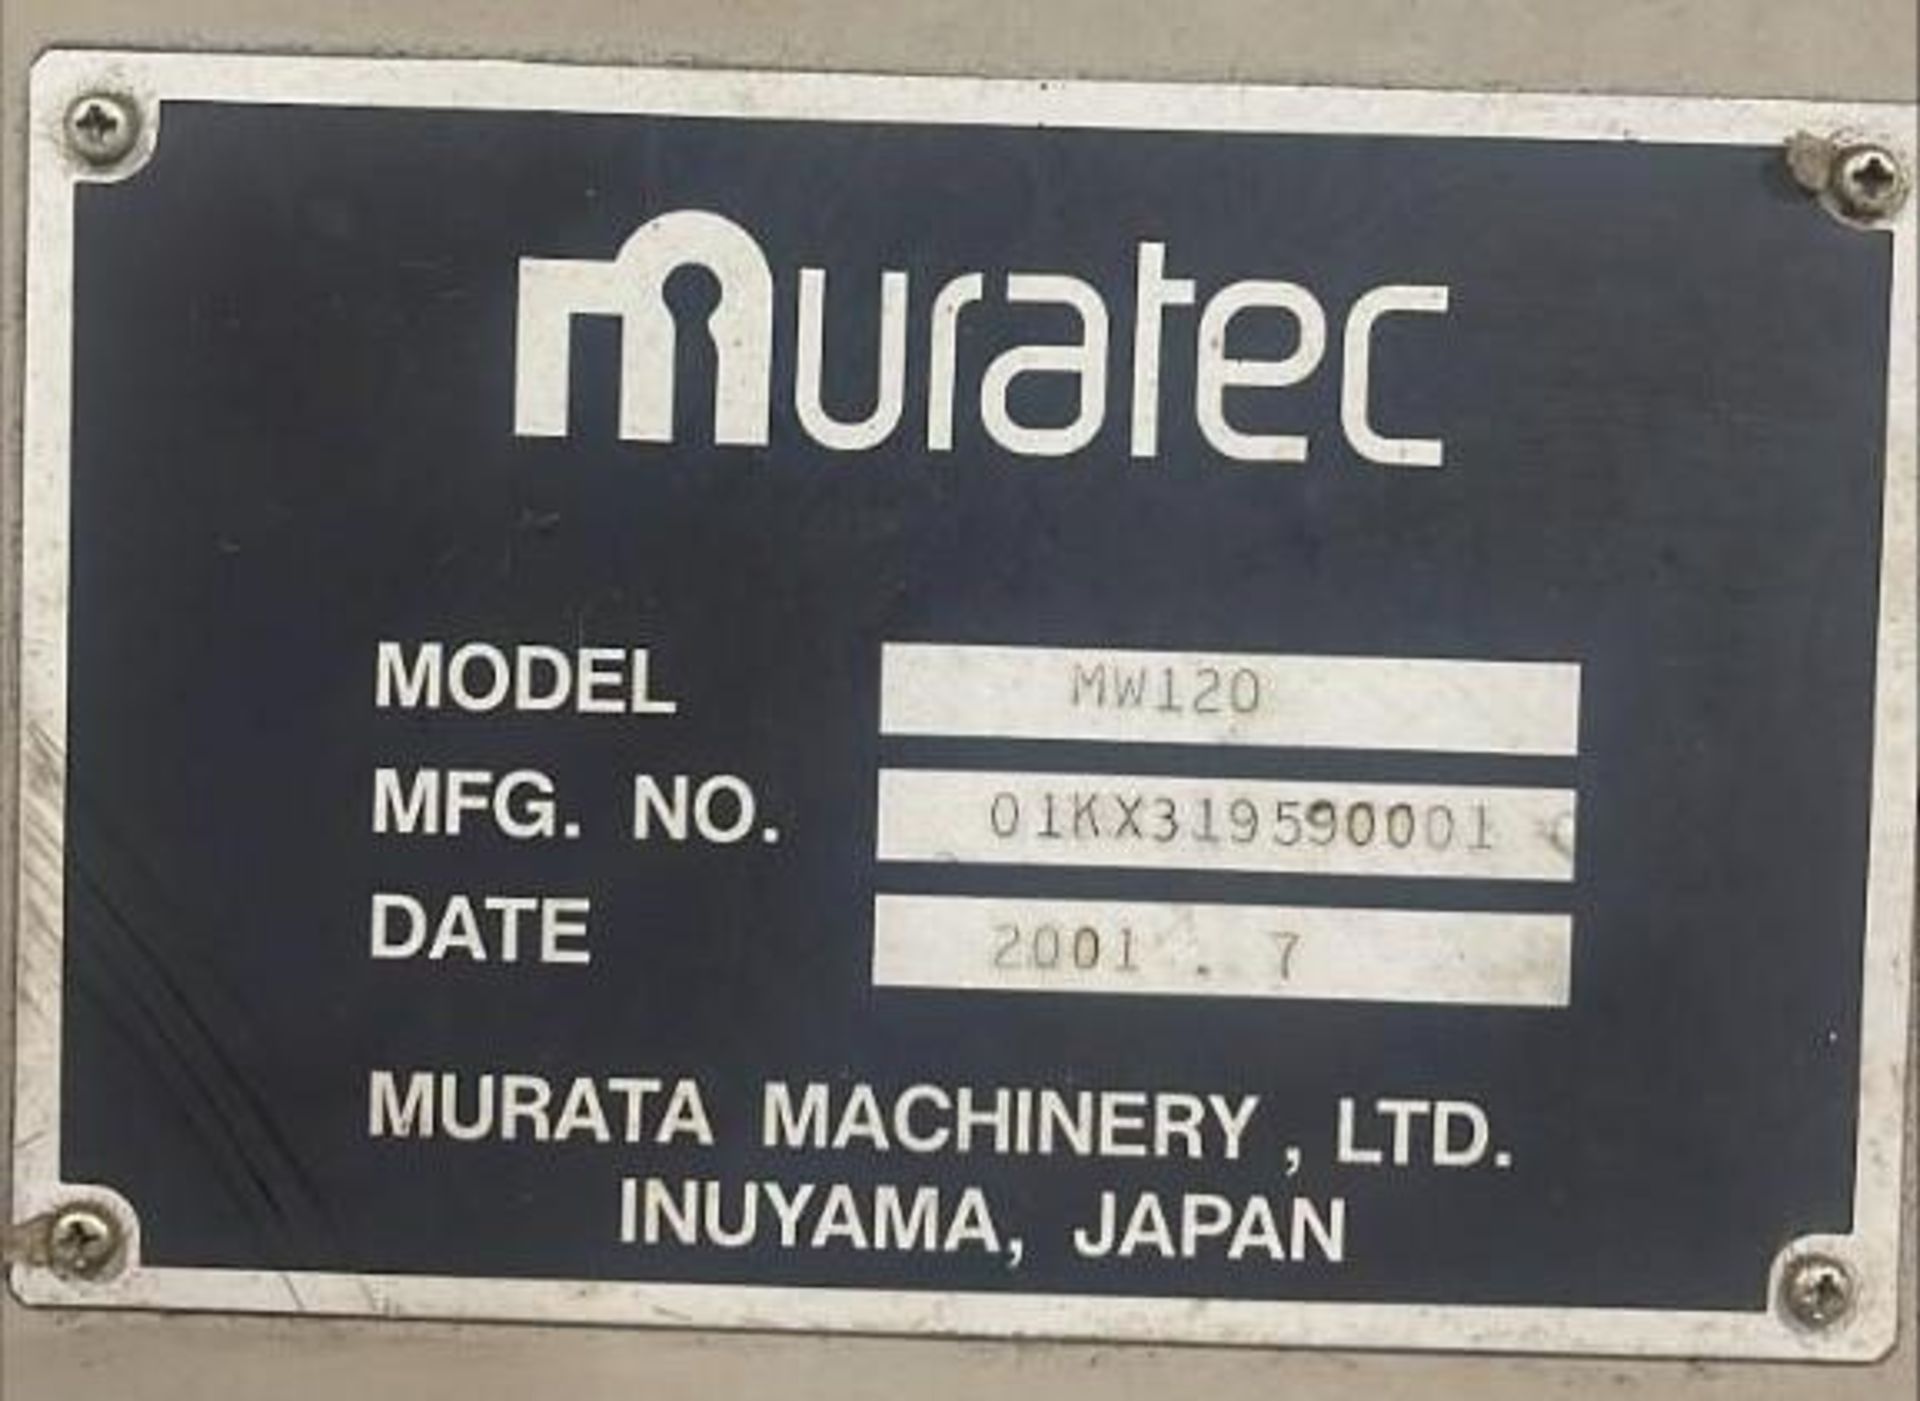 2001 Muratec MW120 Twin Spindle CNC Lathe - Image 2 of 7